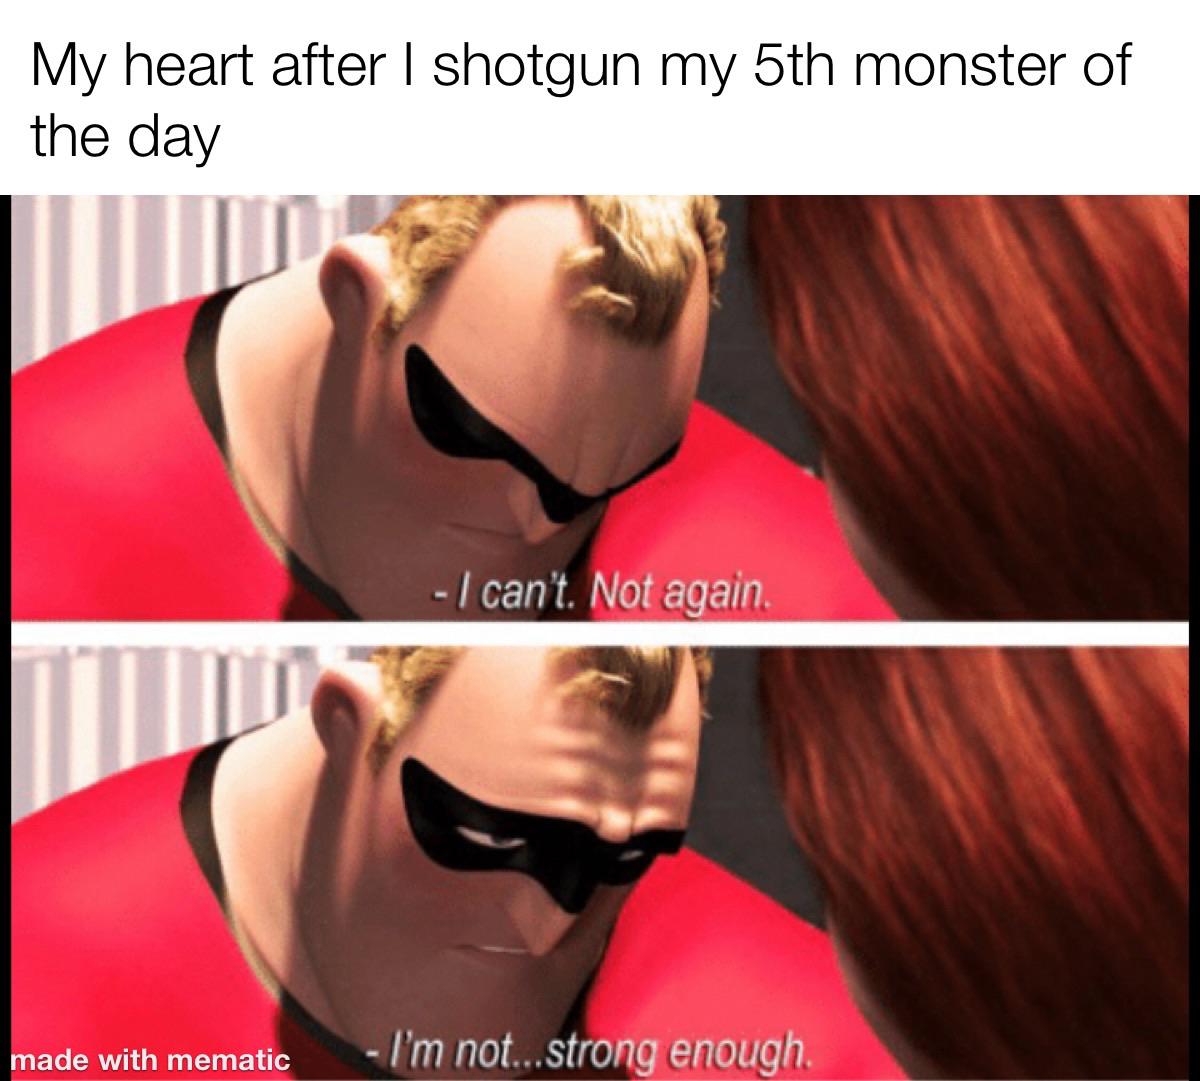 r/collegememes- college dank memes - autocad meme - My heart after I shotgun my 5th monster of the day I can't. Not again made with mematic I'm not...strong enough.